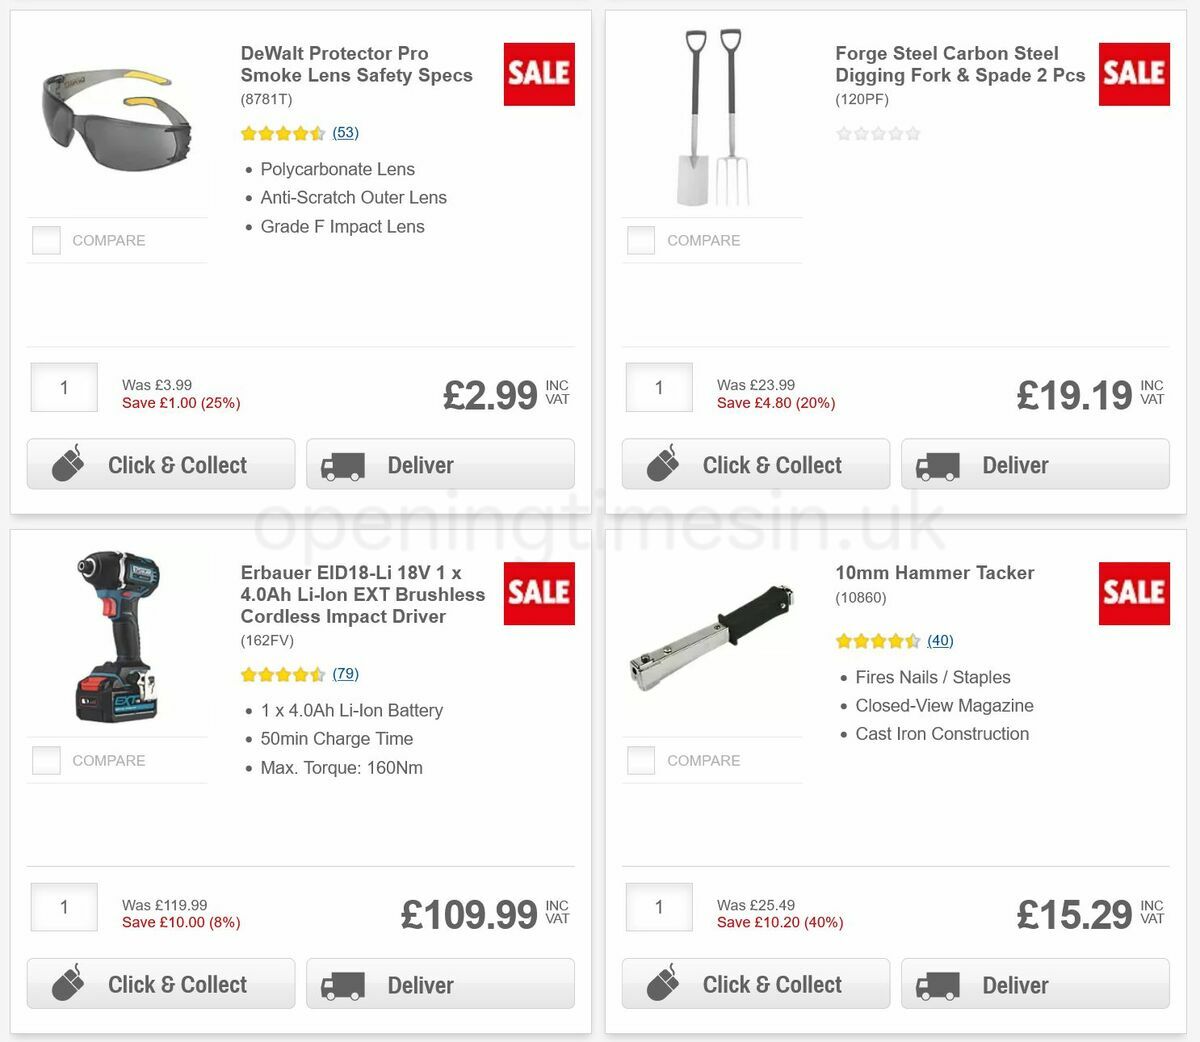 Screwfix Offers from 29 July